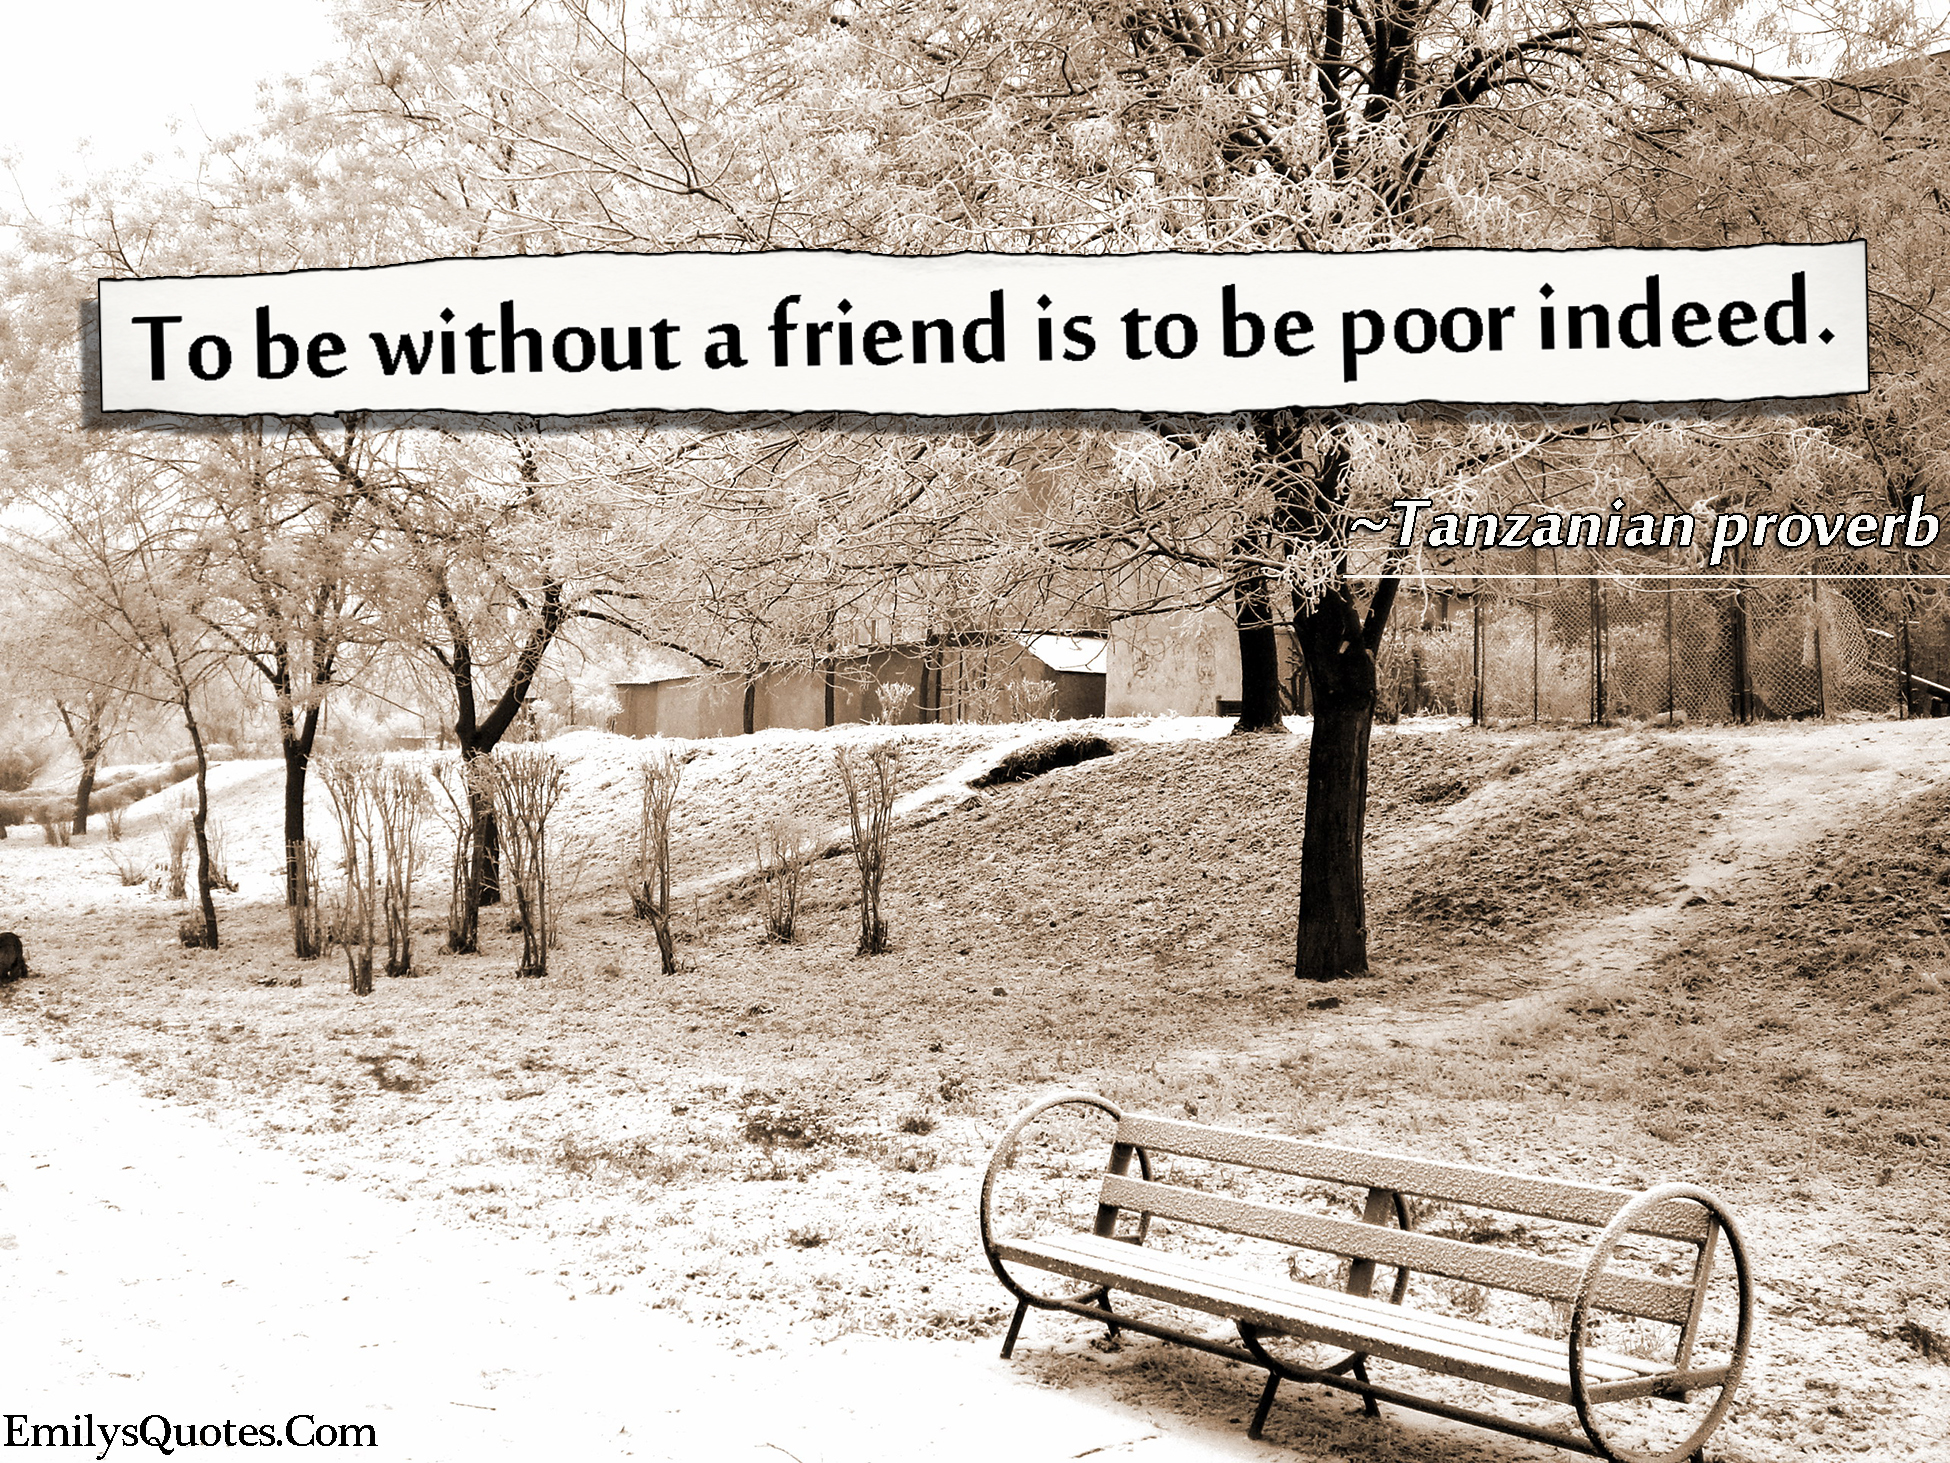 To be without a friend is to be poor indeed